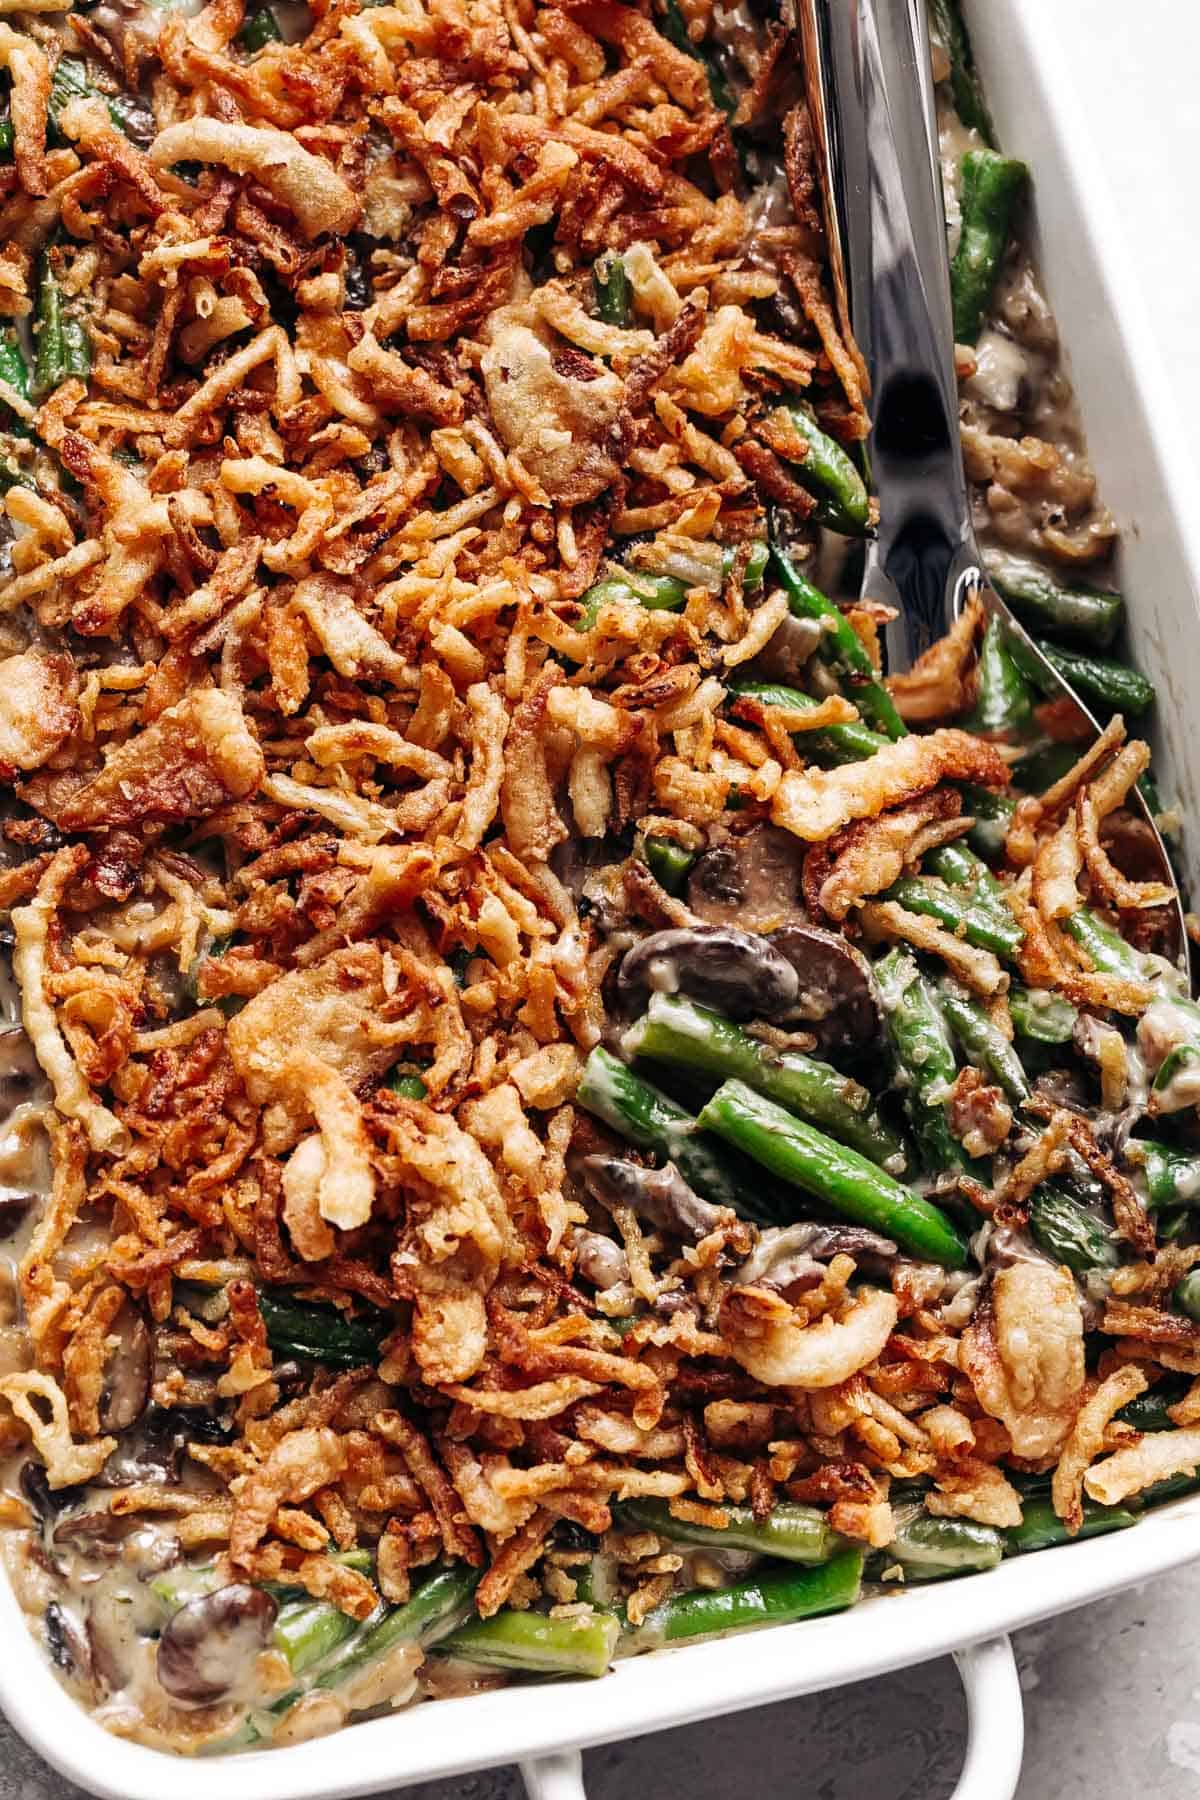 A ladle of green bean casserole fresh out of the oven!